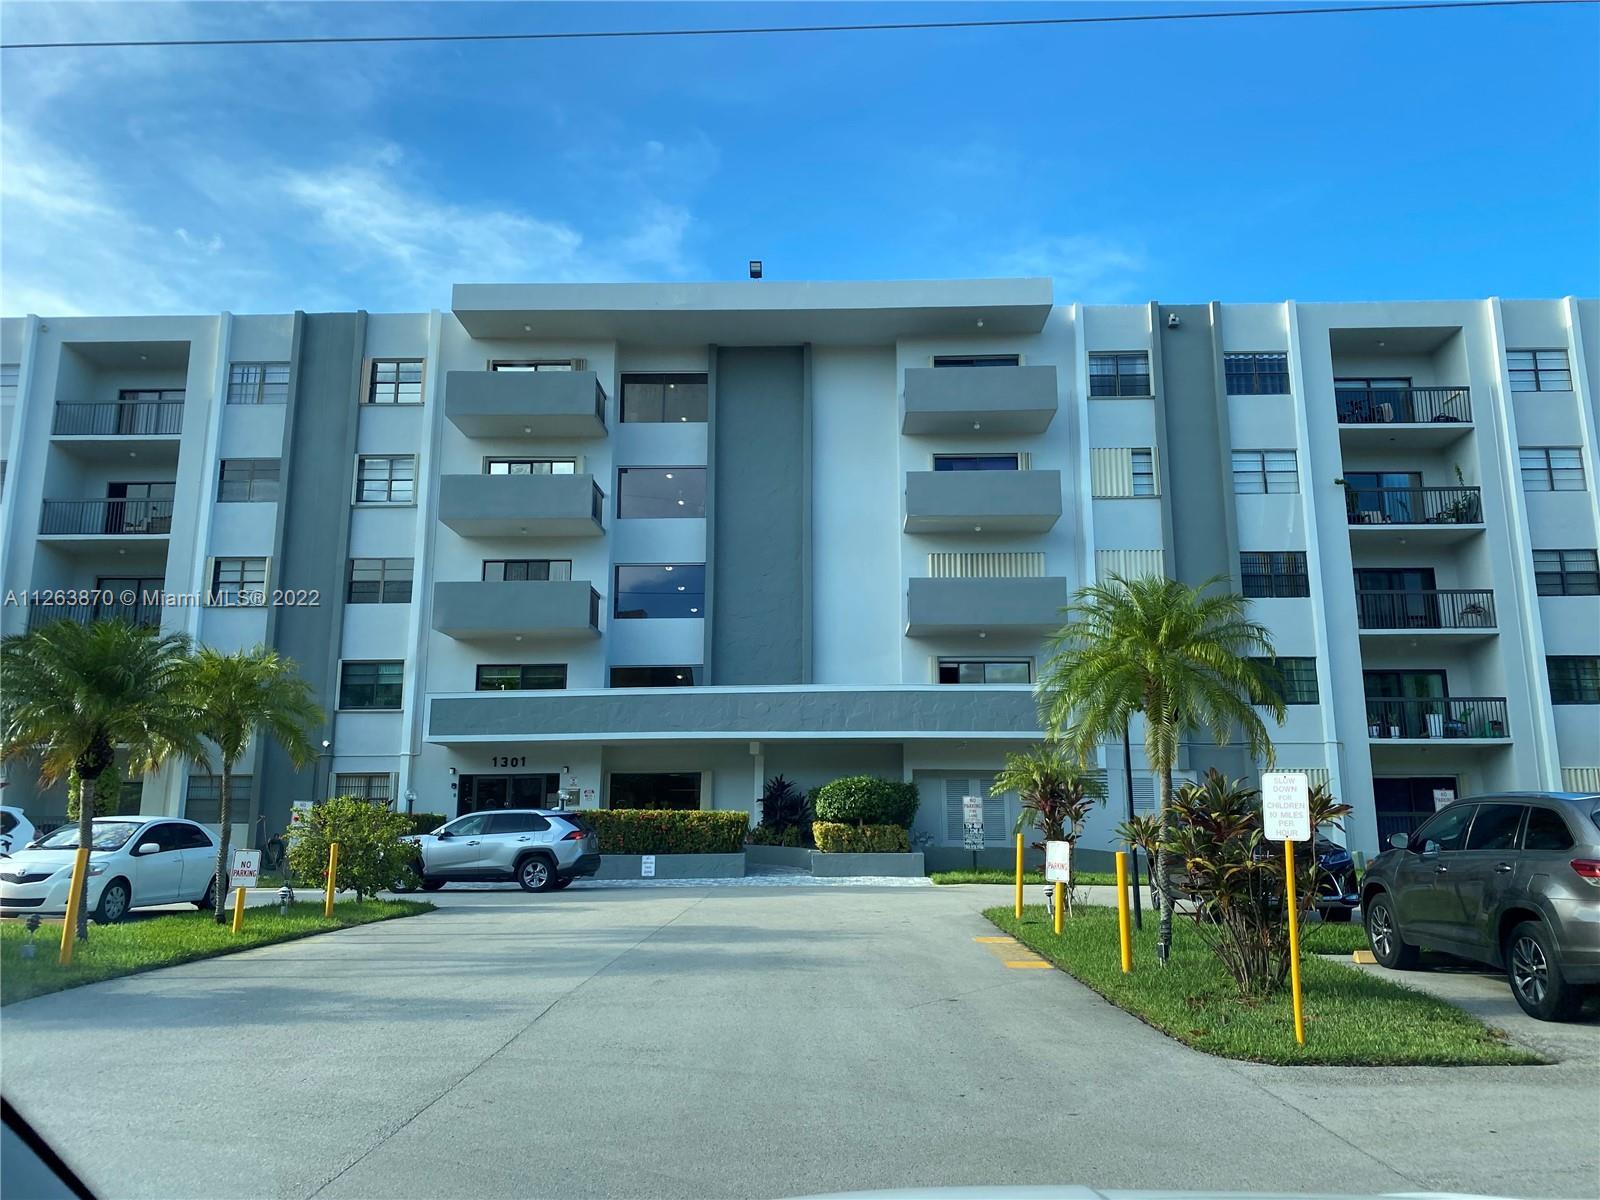 LIVE IN THE HEART OF HALLANDALE BEACH. FIRST FLOOR UNIT EASILY ACCESSIBLE. VERY SPACIOUS UNIT, TILED